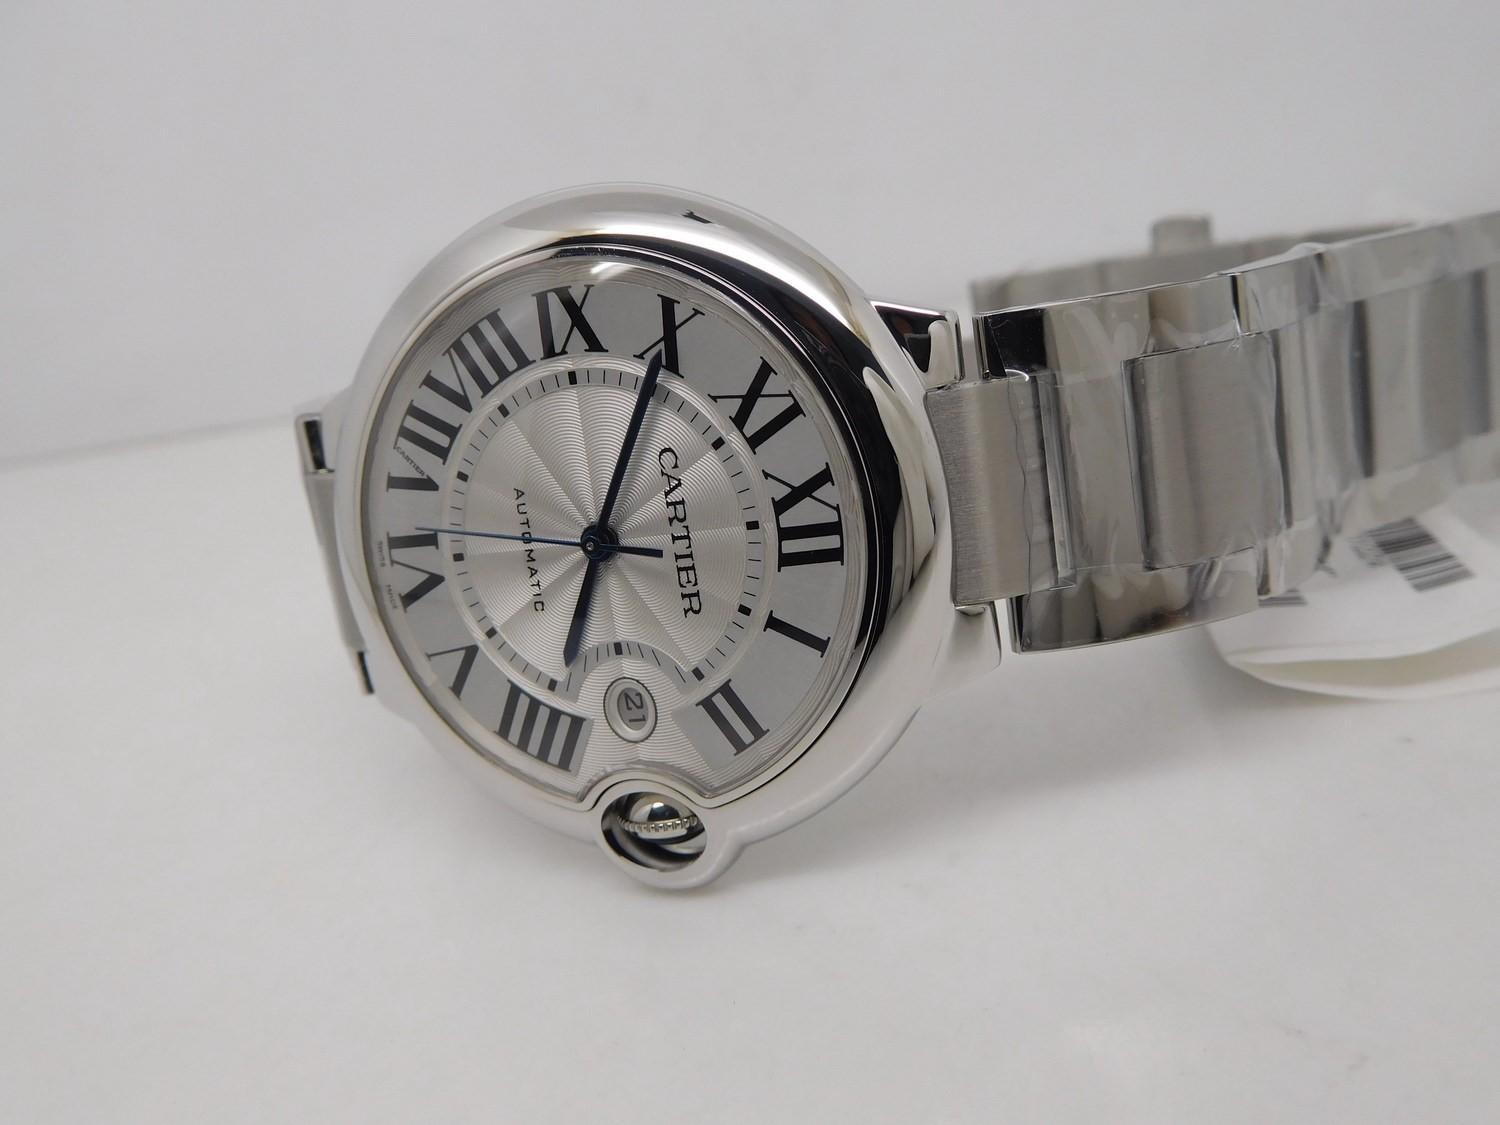 Contemporary Cartier Ballon Bleu 3765 W69012Z4 Men’s Automatic Watch with Box and Papers For Sale